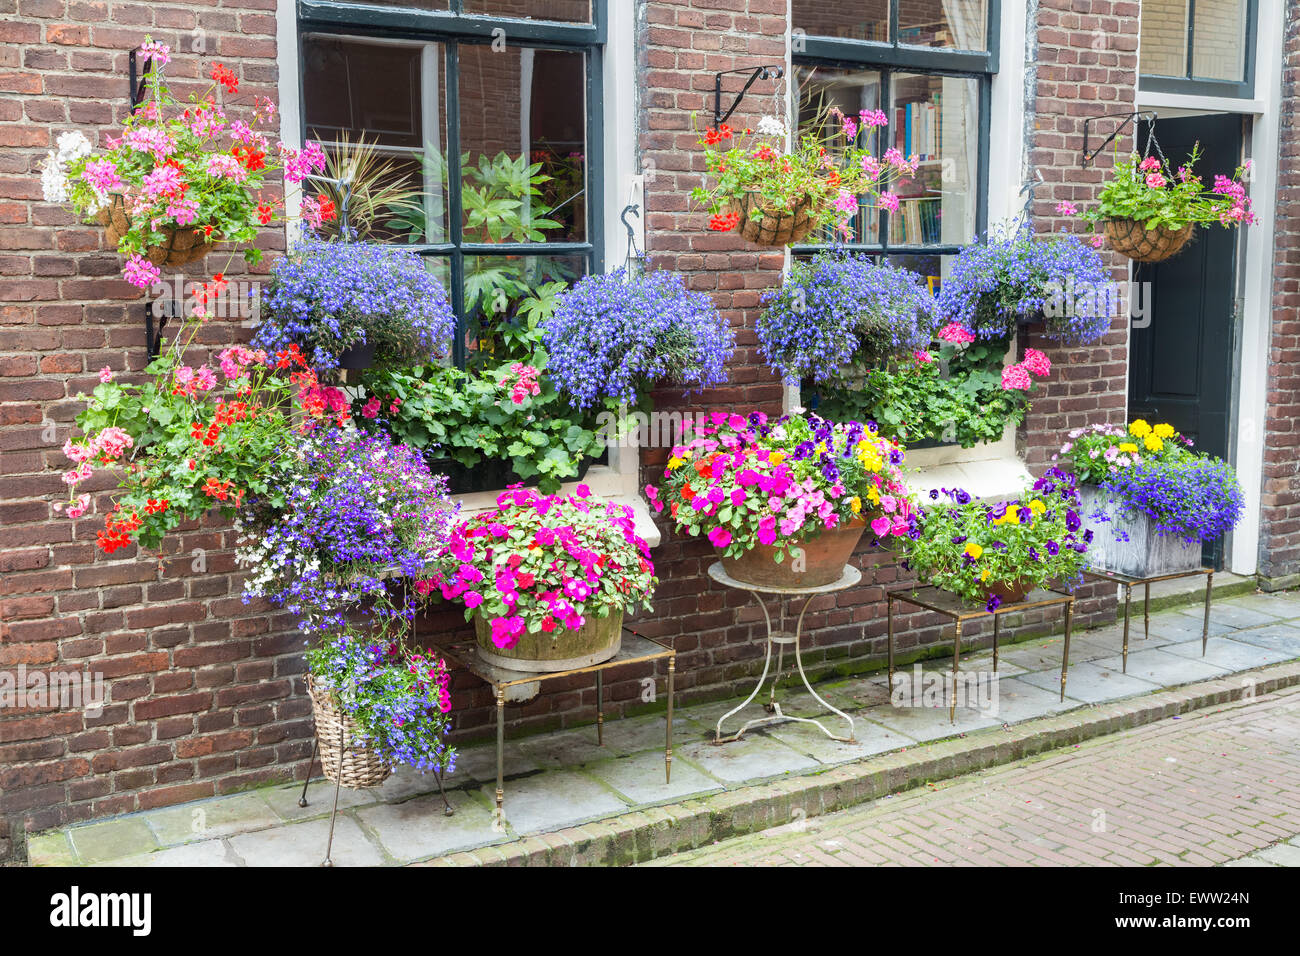 Many pottery flowers hanging at brick wall in summer season Stock Photo